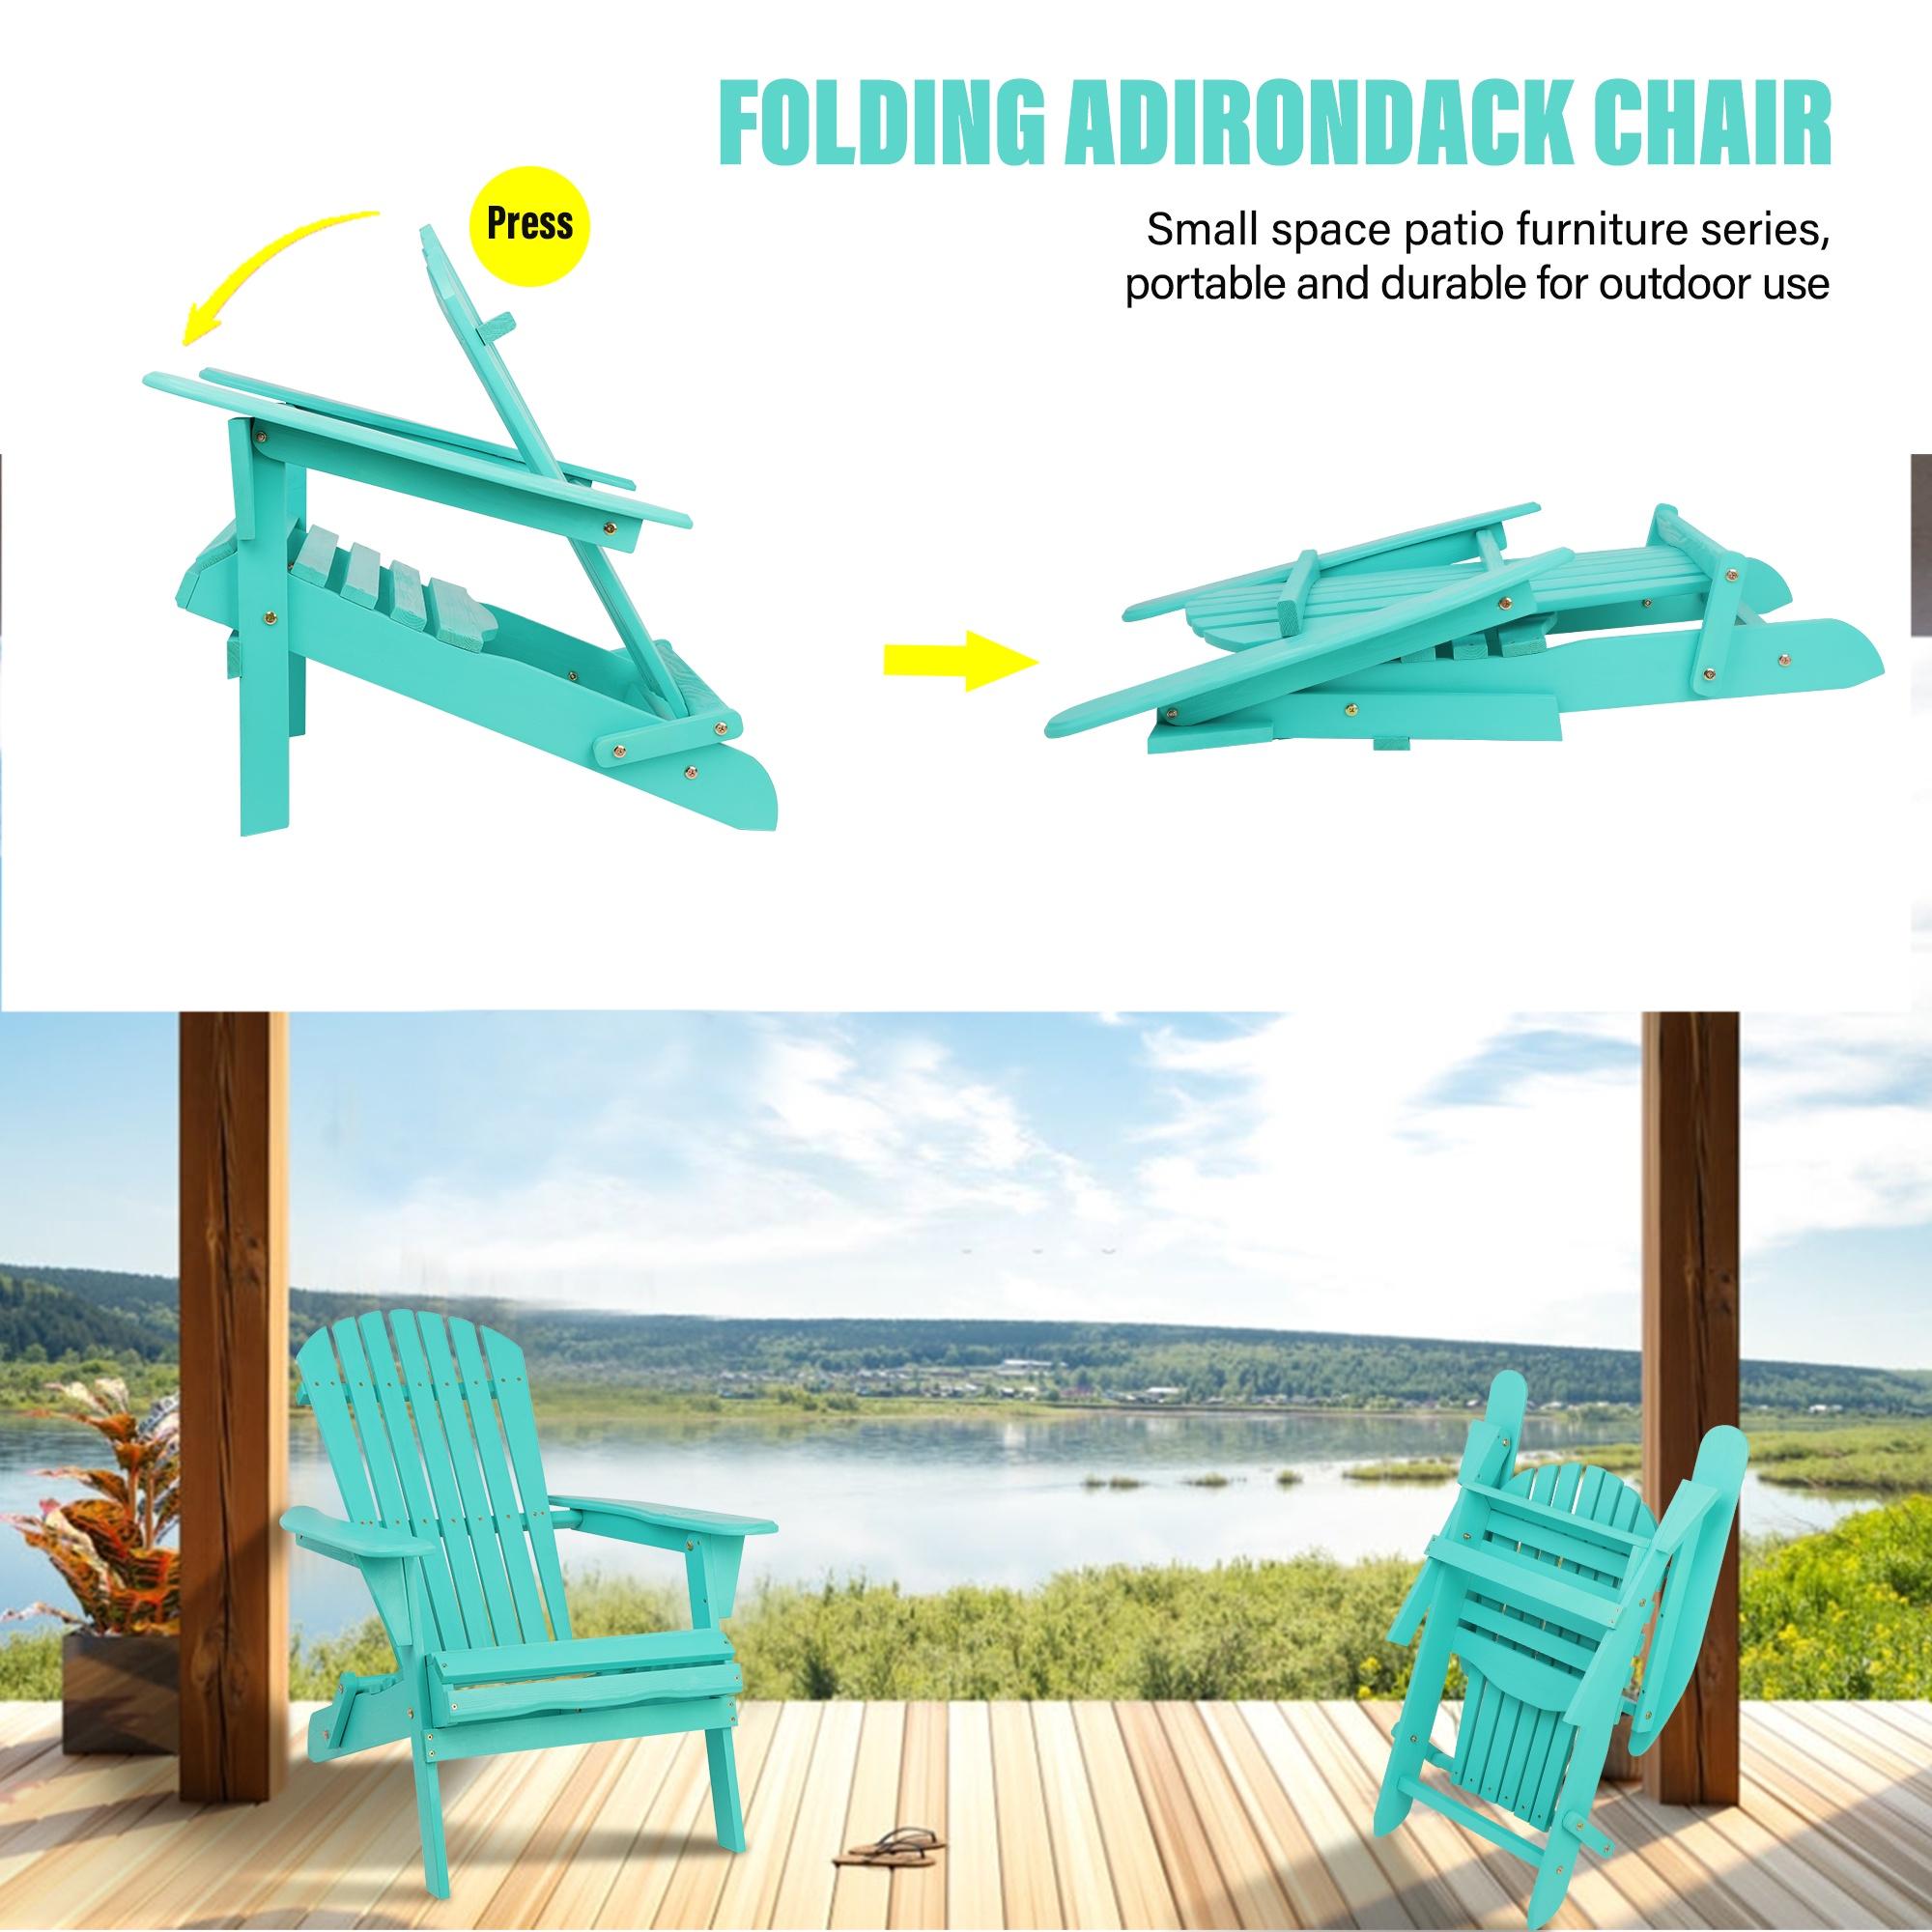 Outdoor Adirondack Chair, Seizeen Wooden Folding Adirondack Chair, Patio Furniture Lounge Chair Quick Assembled, Outdoor Chairs for Deck Pool Yard Garden, Cyan - image 5 of 8